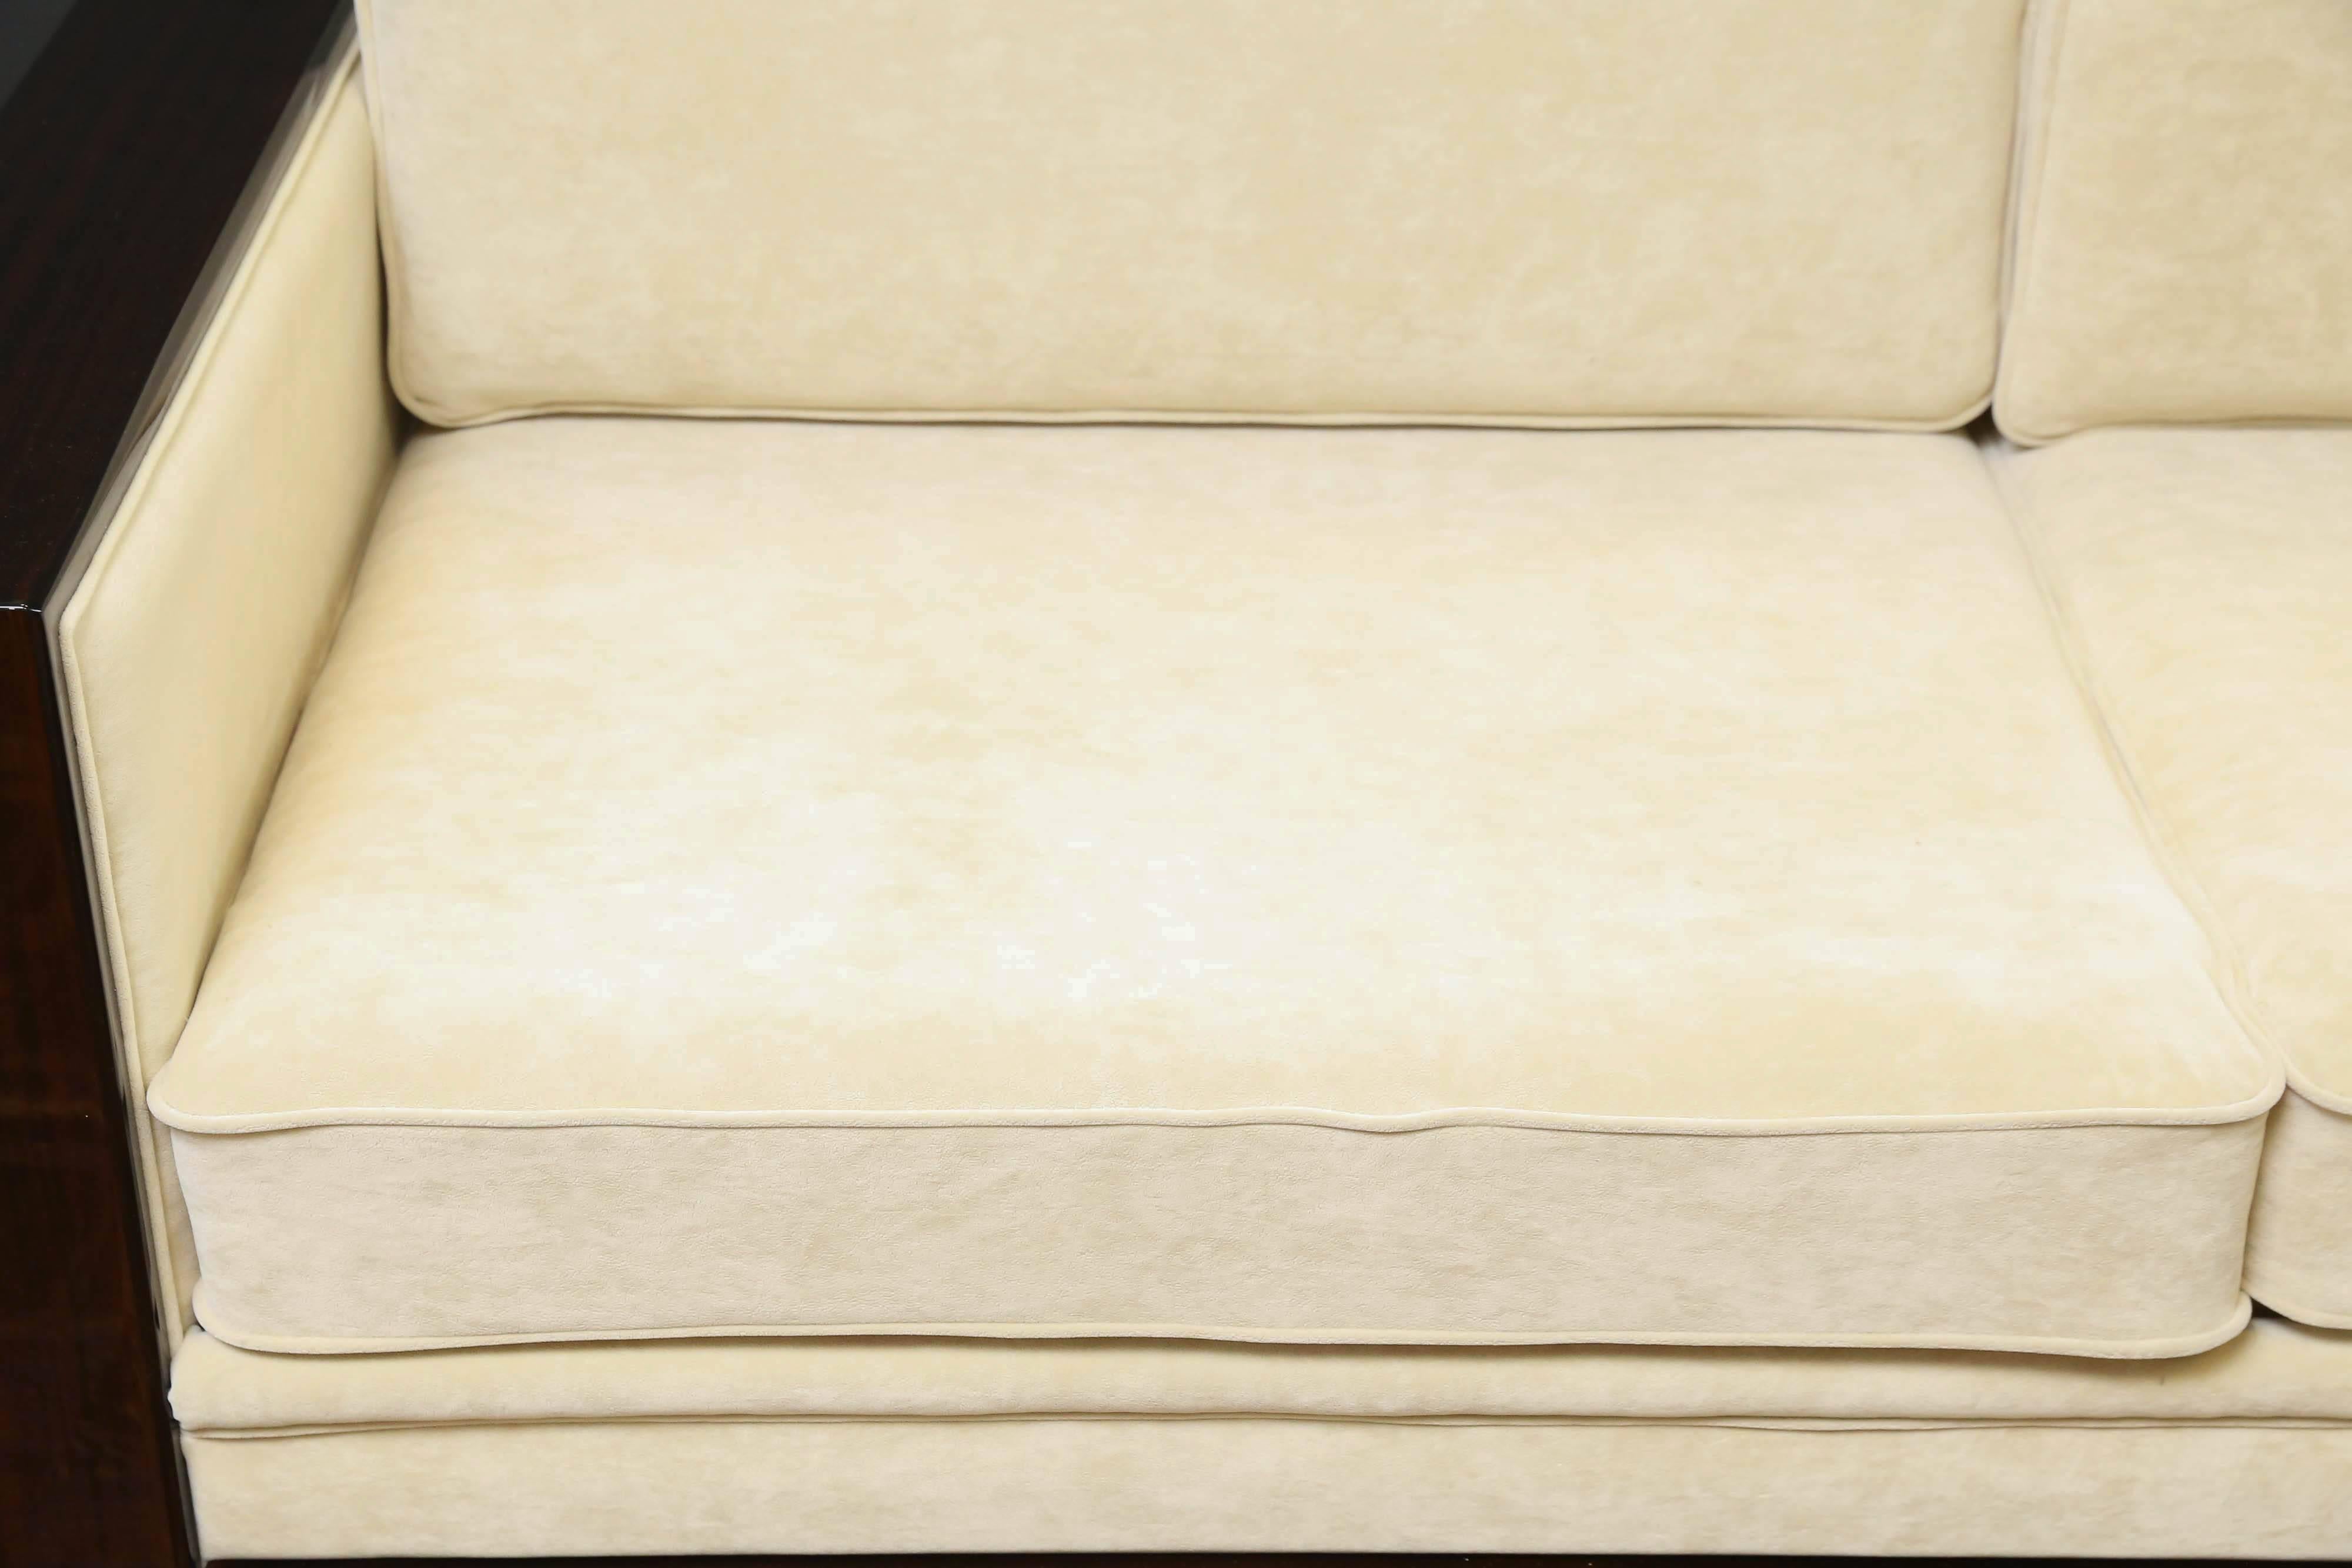 The base of the sofa is made out of Fine walnut wood. It is re-upholstered in a light yellow fabric. It has two pairs of pillows and wide wooden arm rests. The thickness of pillows provide very good back support. 
Condition is excellent. 

